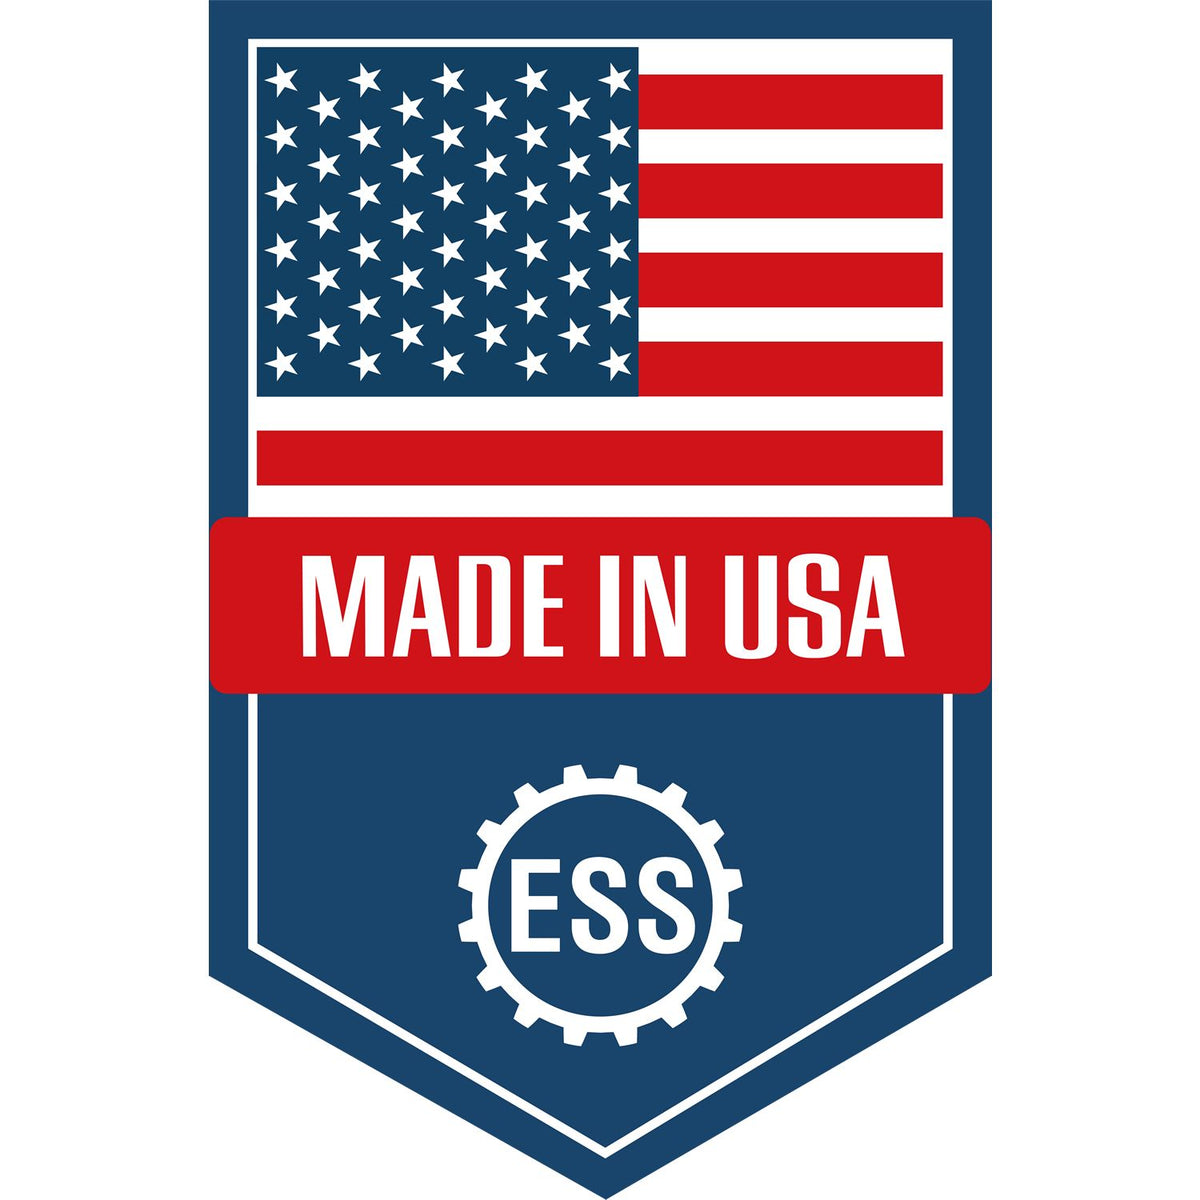 An icon or graphic with an american flag and text reading Made in USA for the Slim Pre-Inked Ohio Landscape Architect Seal Stamp